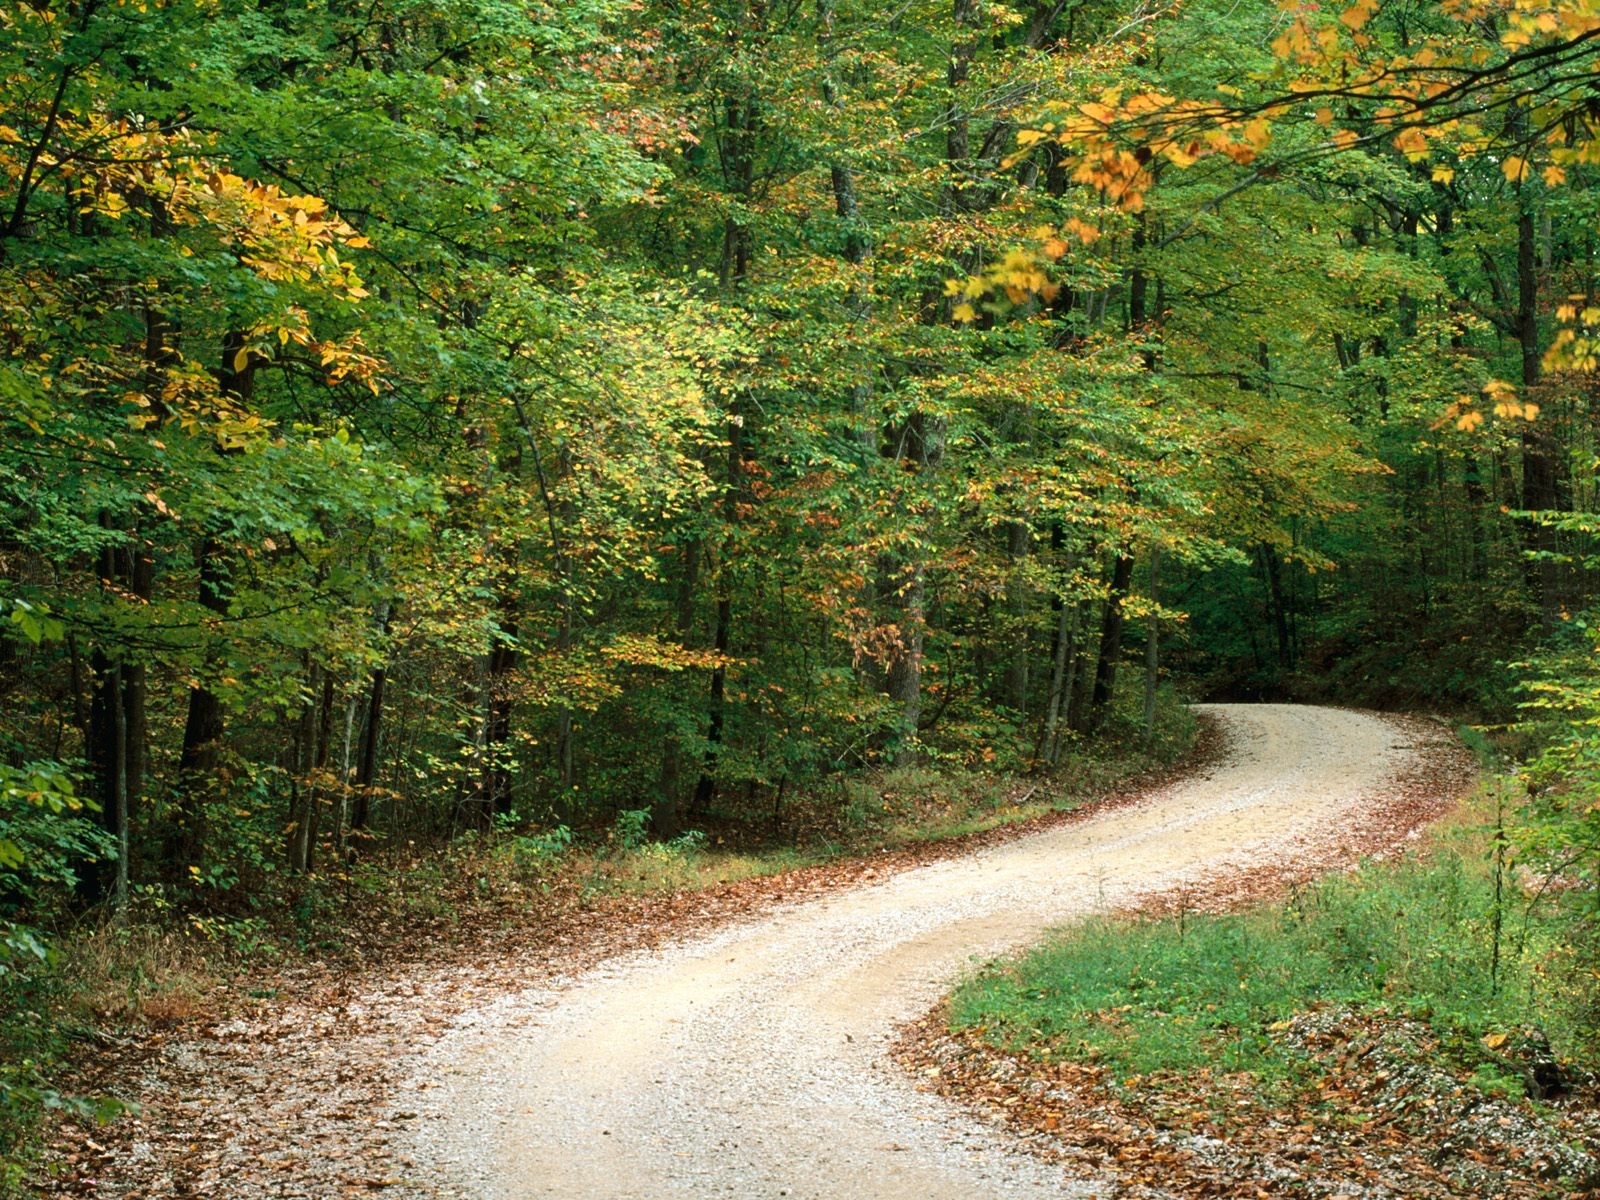 General 1600x1200 forest dirt road green foliage path leaves